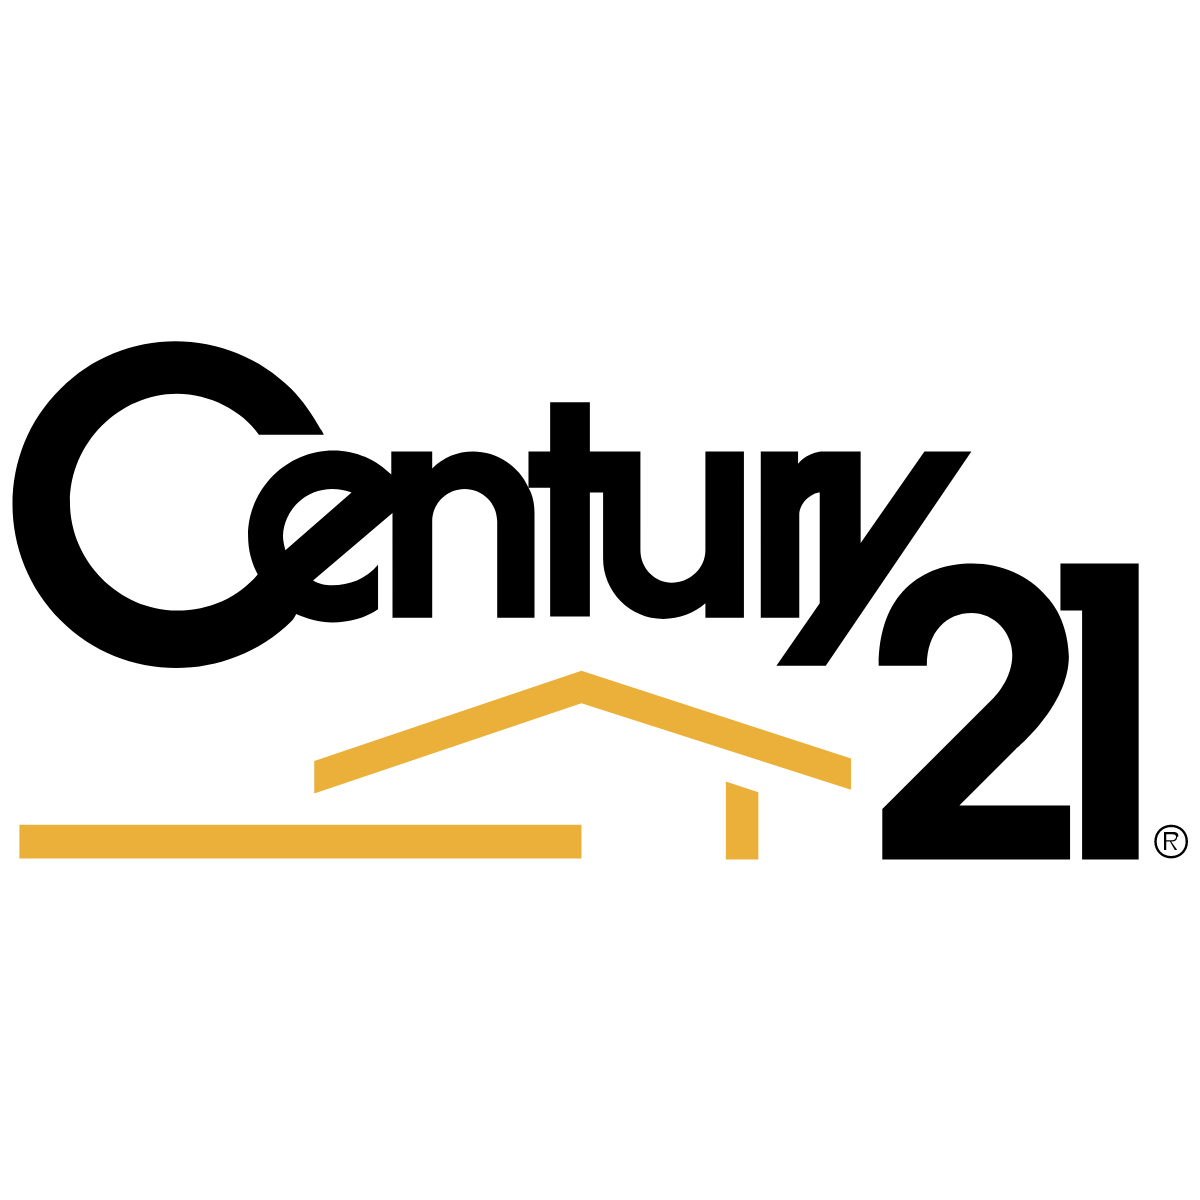 Century Real Estate Logo - Century 21 CEO will step down in March